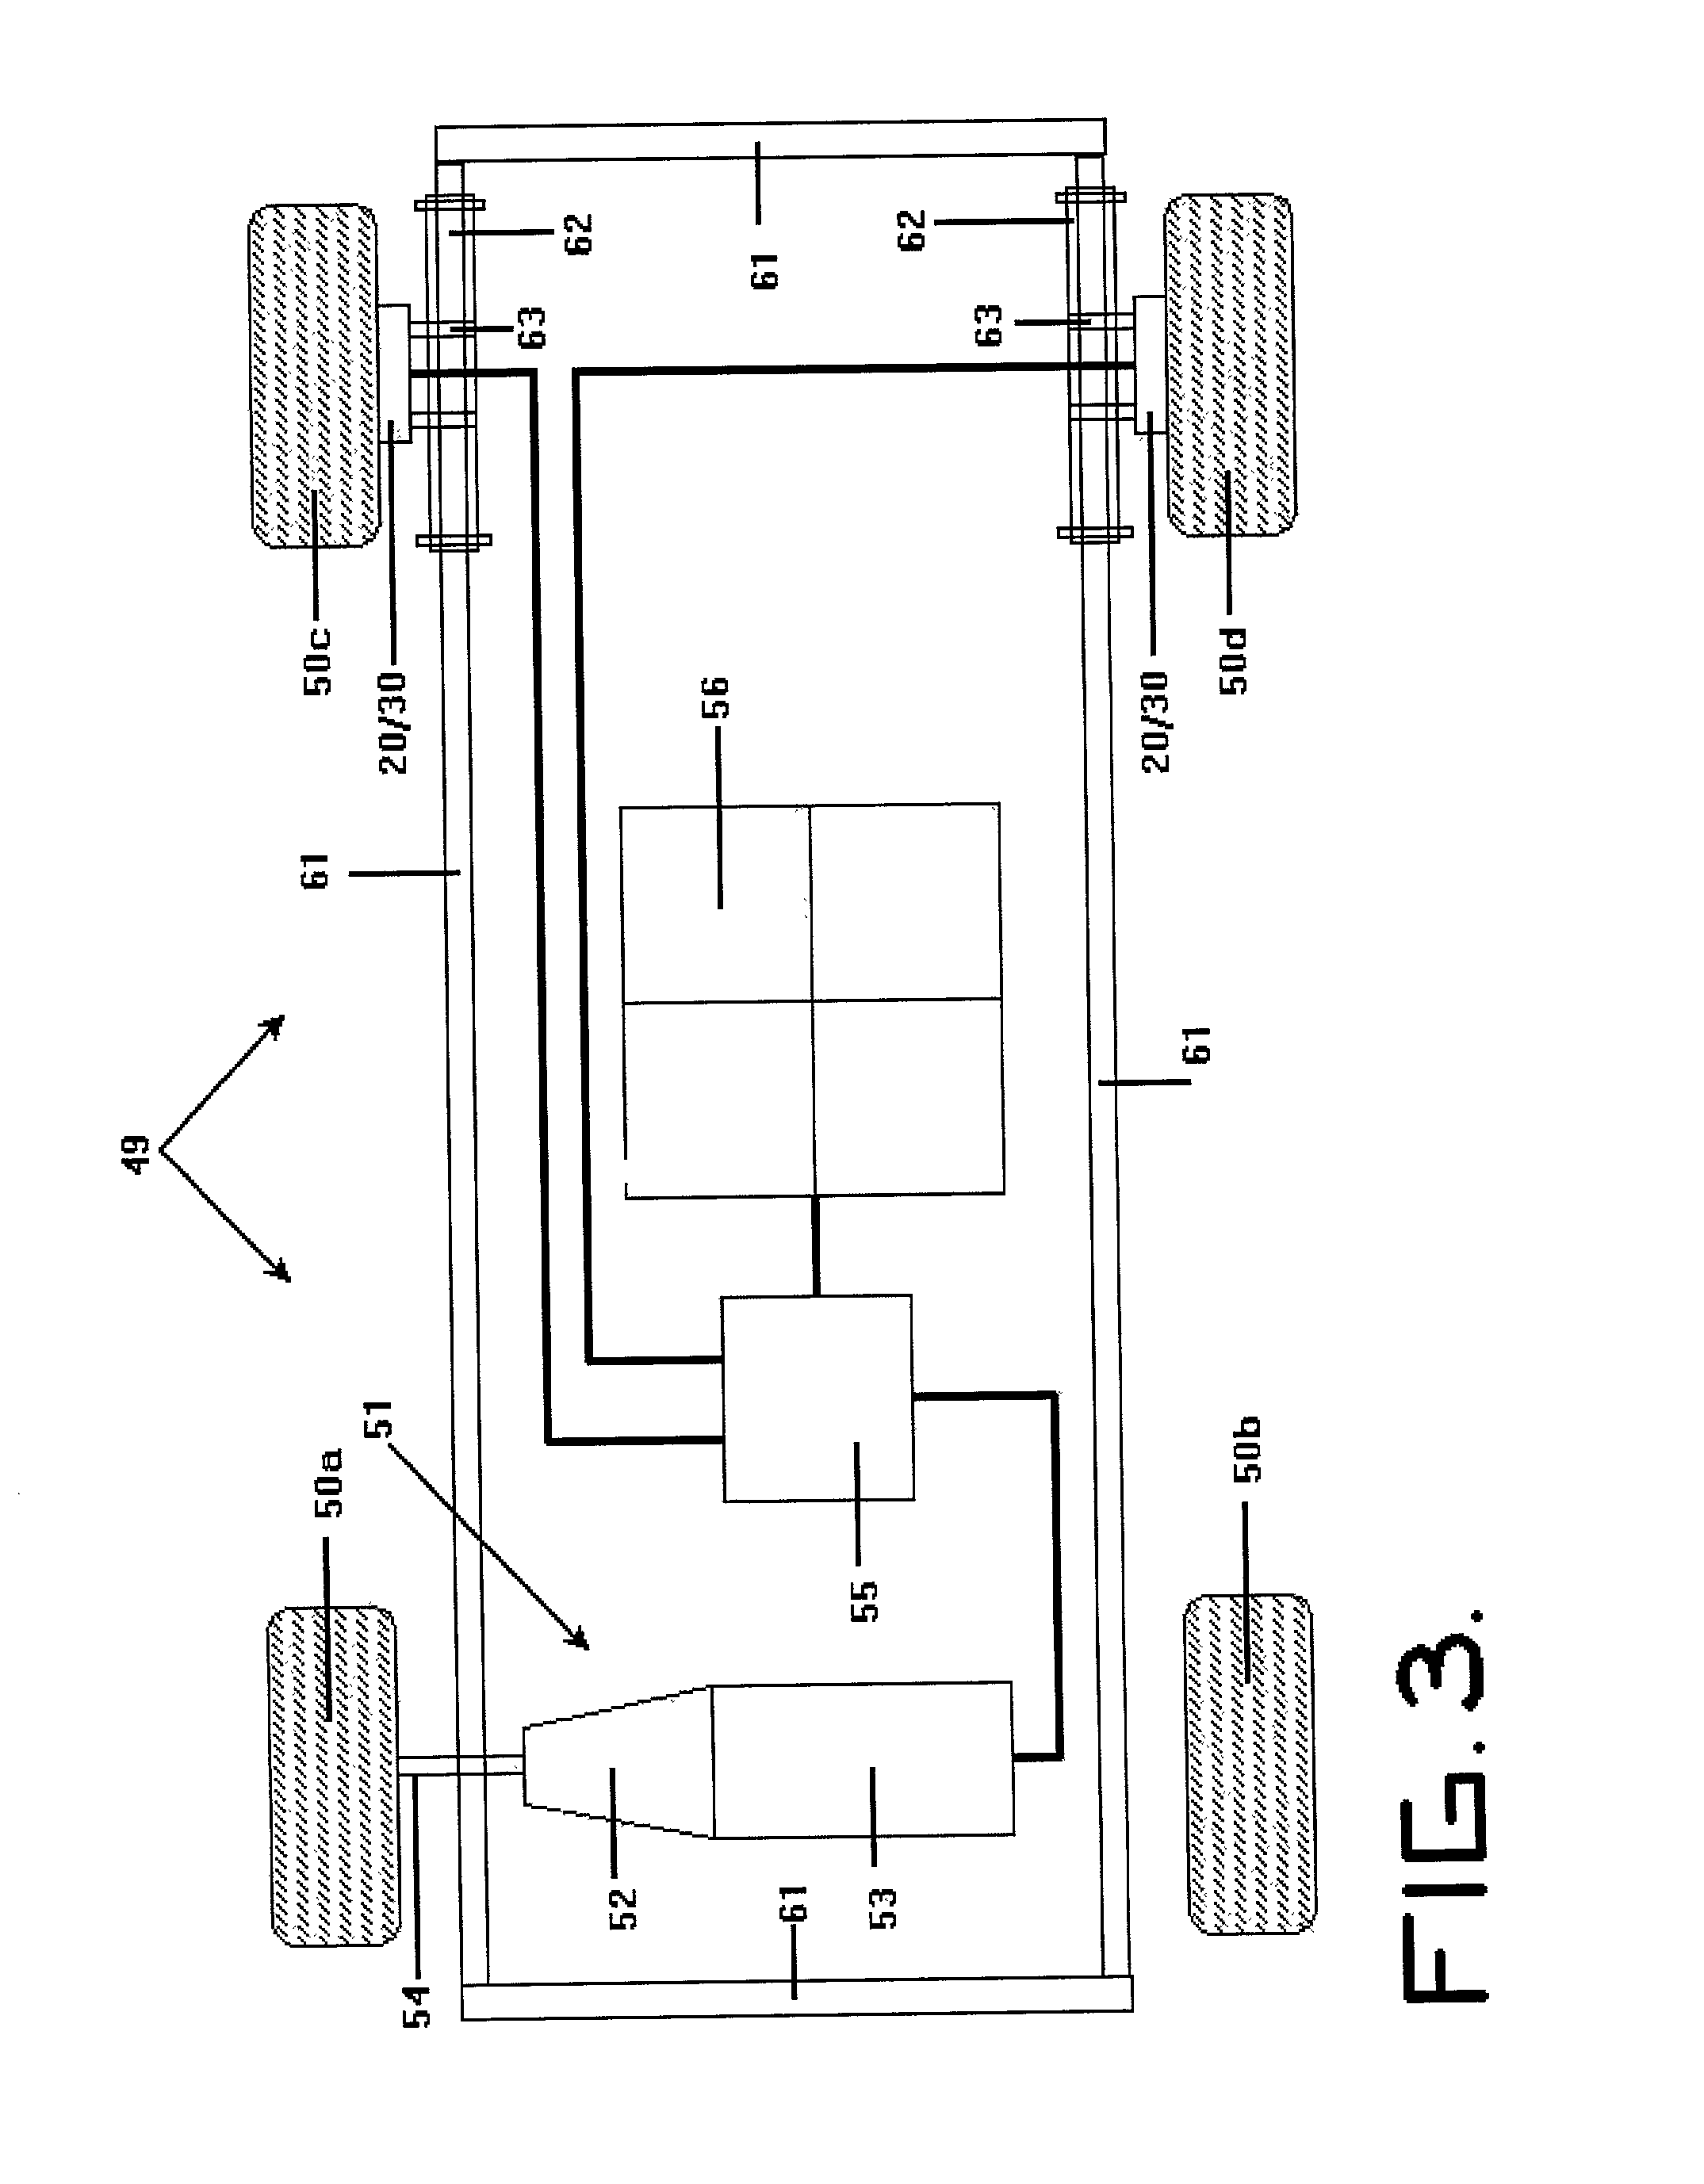 Electric power generation system for electric vehicles